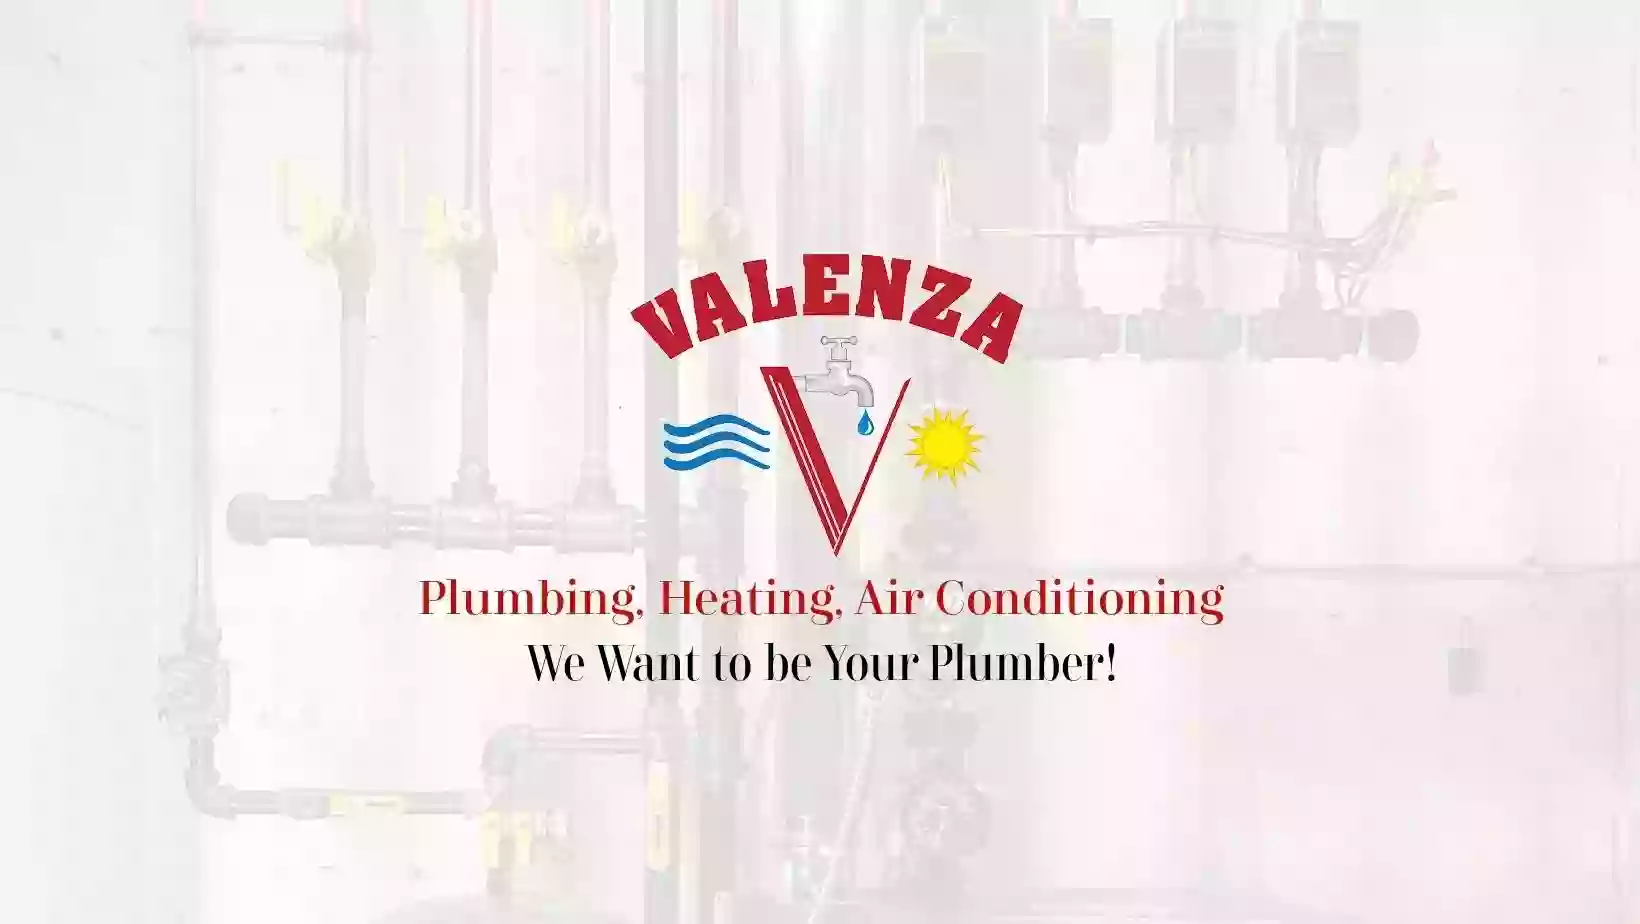 Valenza Plumbing, Heating and Air Conditioning, Inc